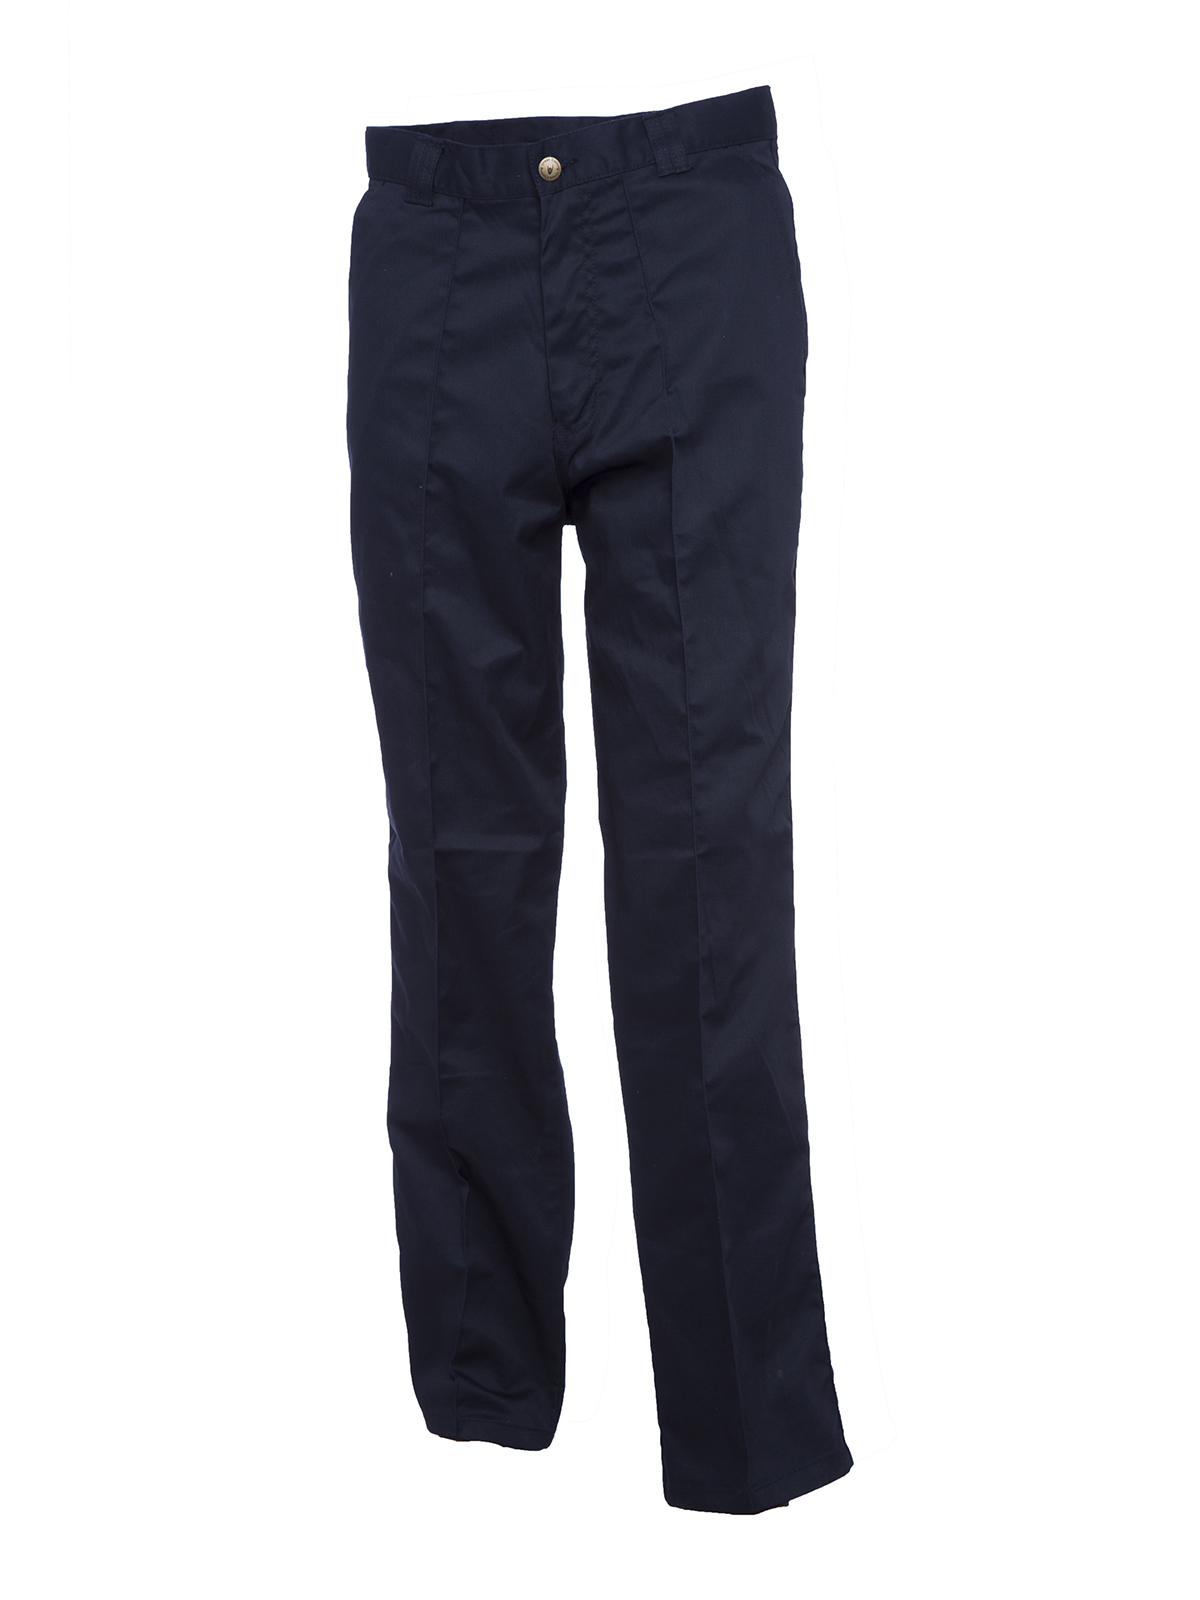 Workwear Trousers, Navy Blue - 42R